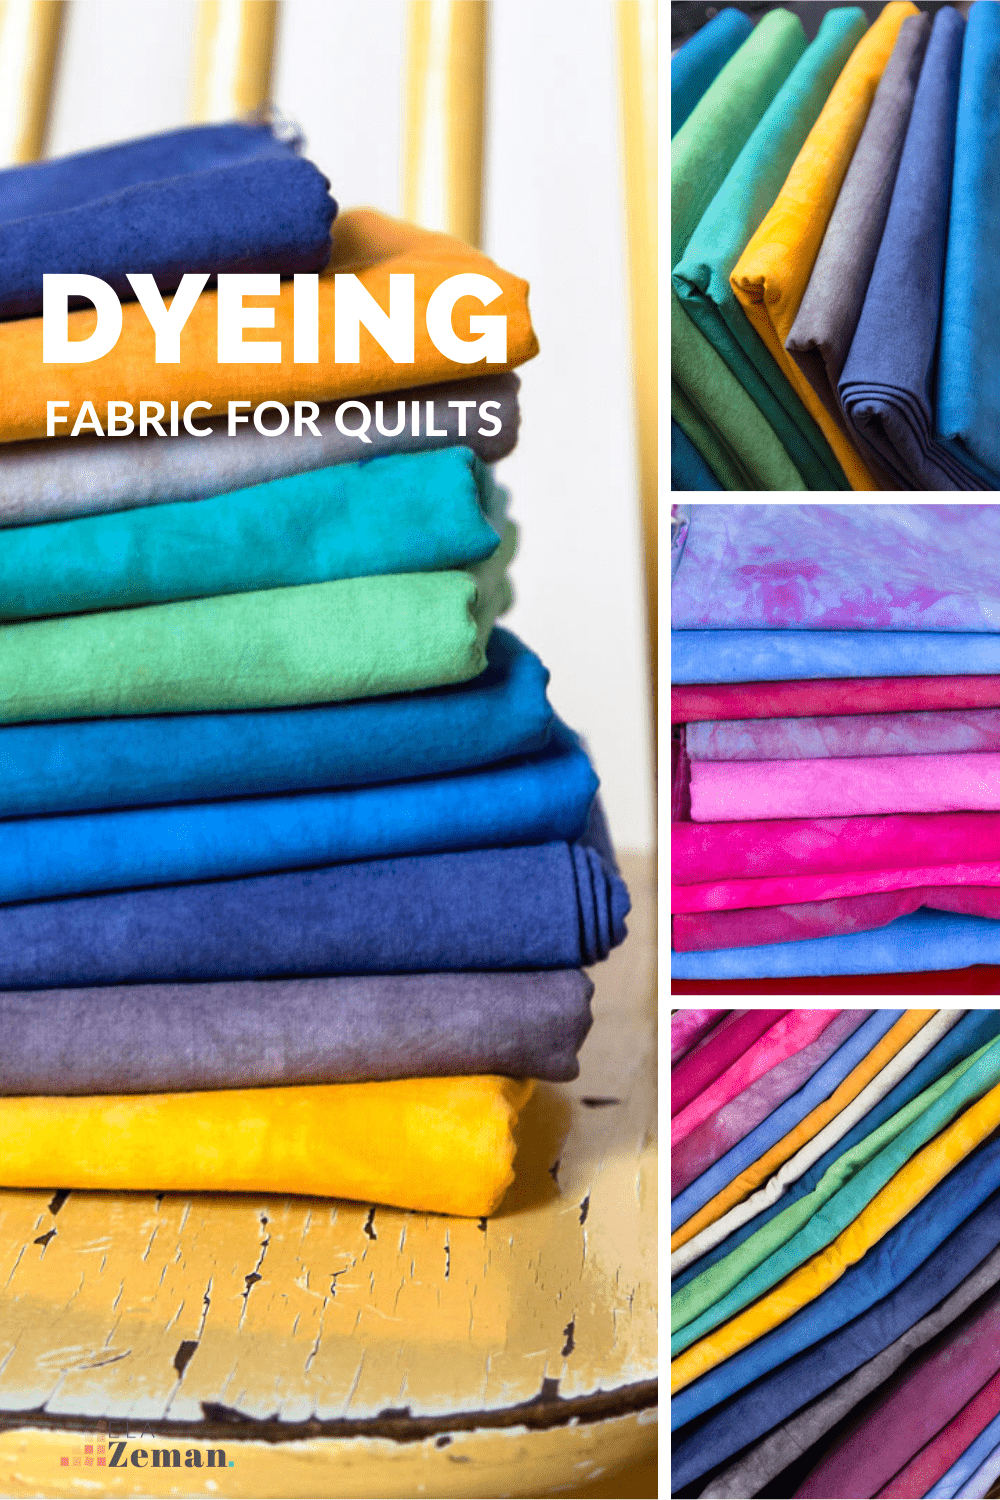 Dyeing fabric for quilts